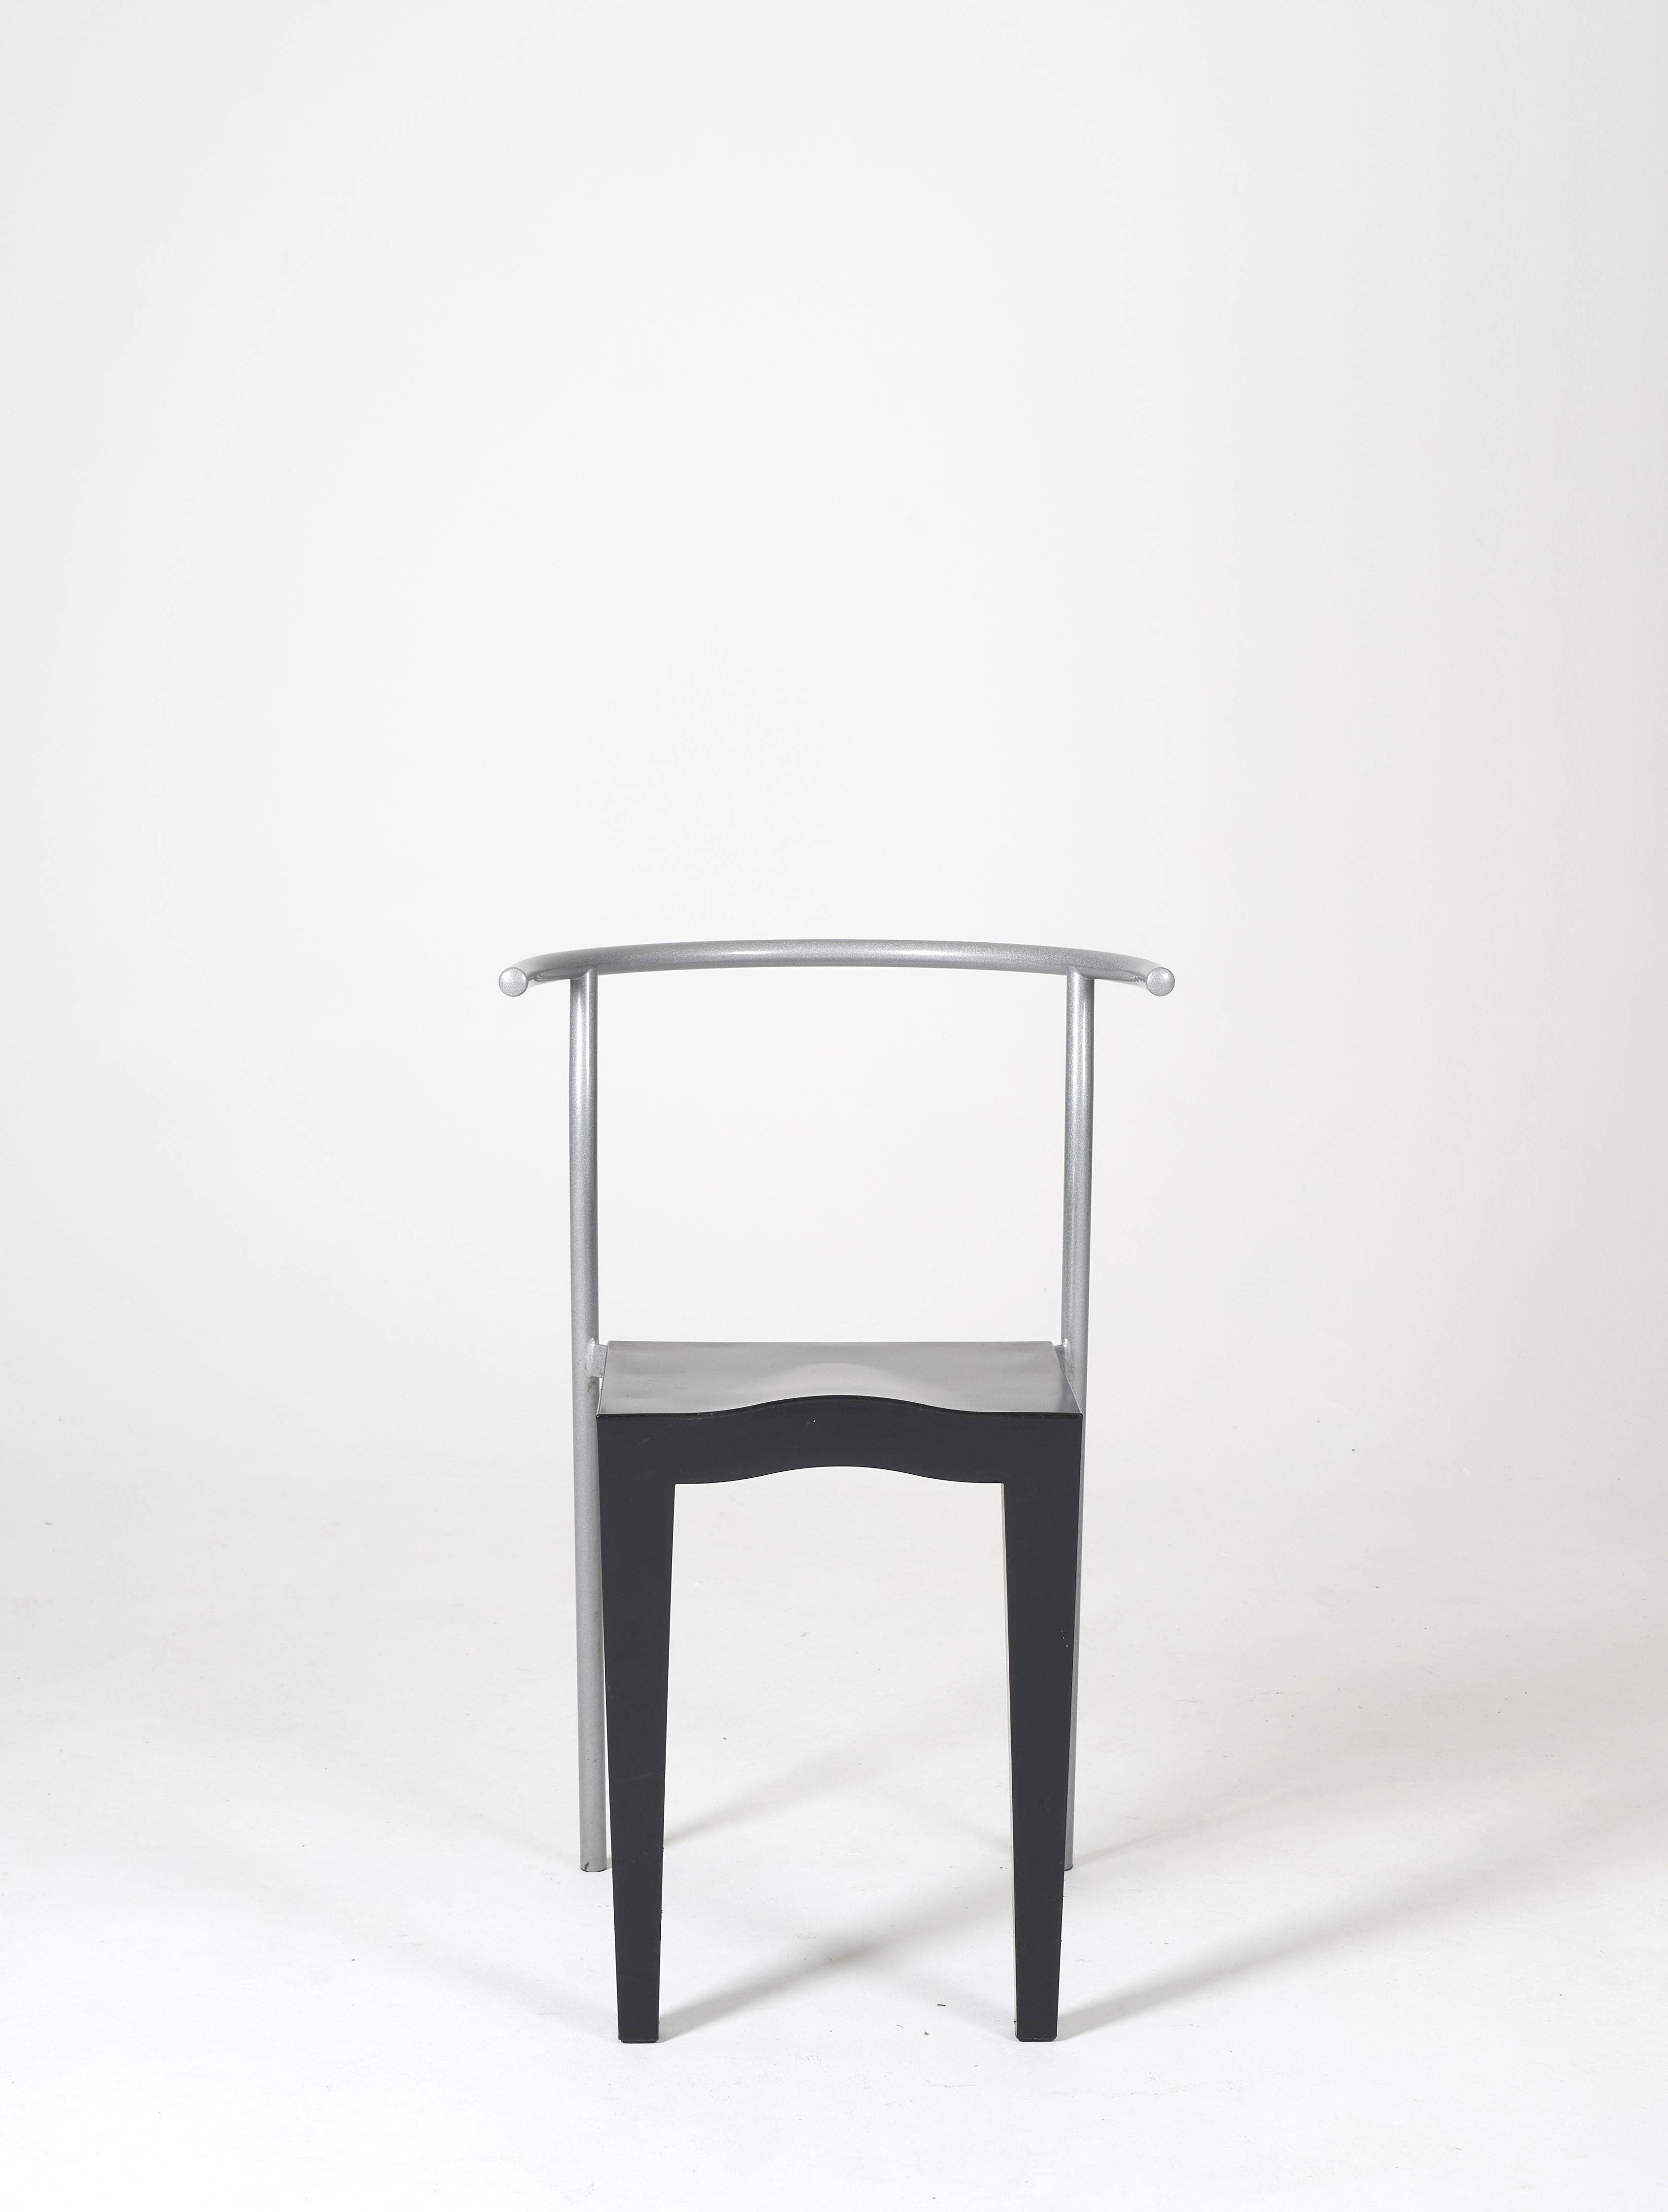 Black chair Dr Glob by Philippe Starck for Kartell. Italy 1988. Seat in polypropylene and base in varnished steel. 2 available.